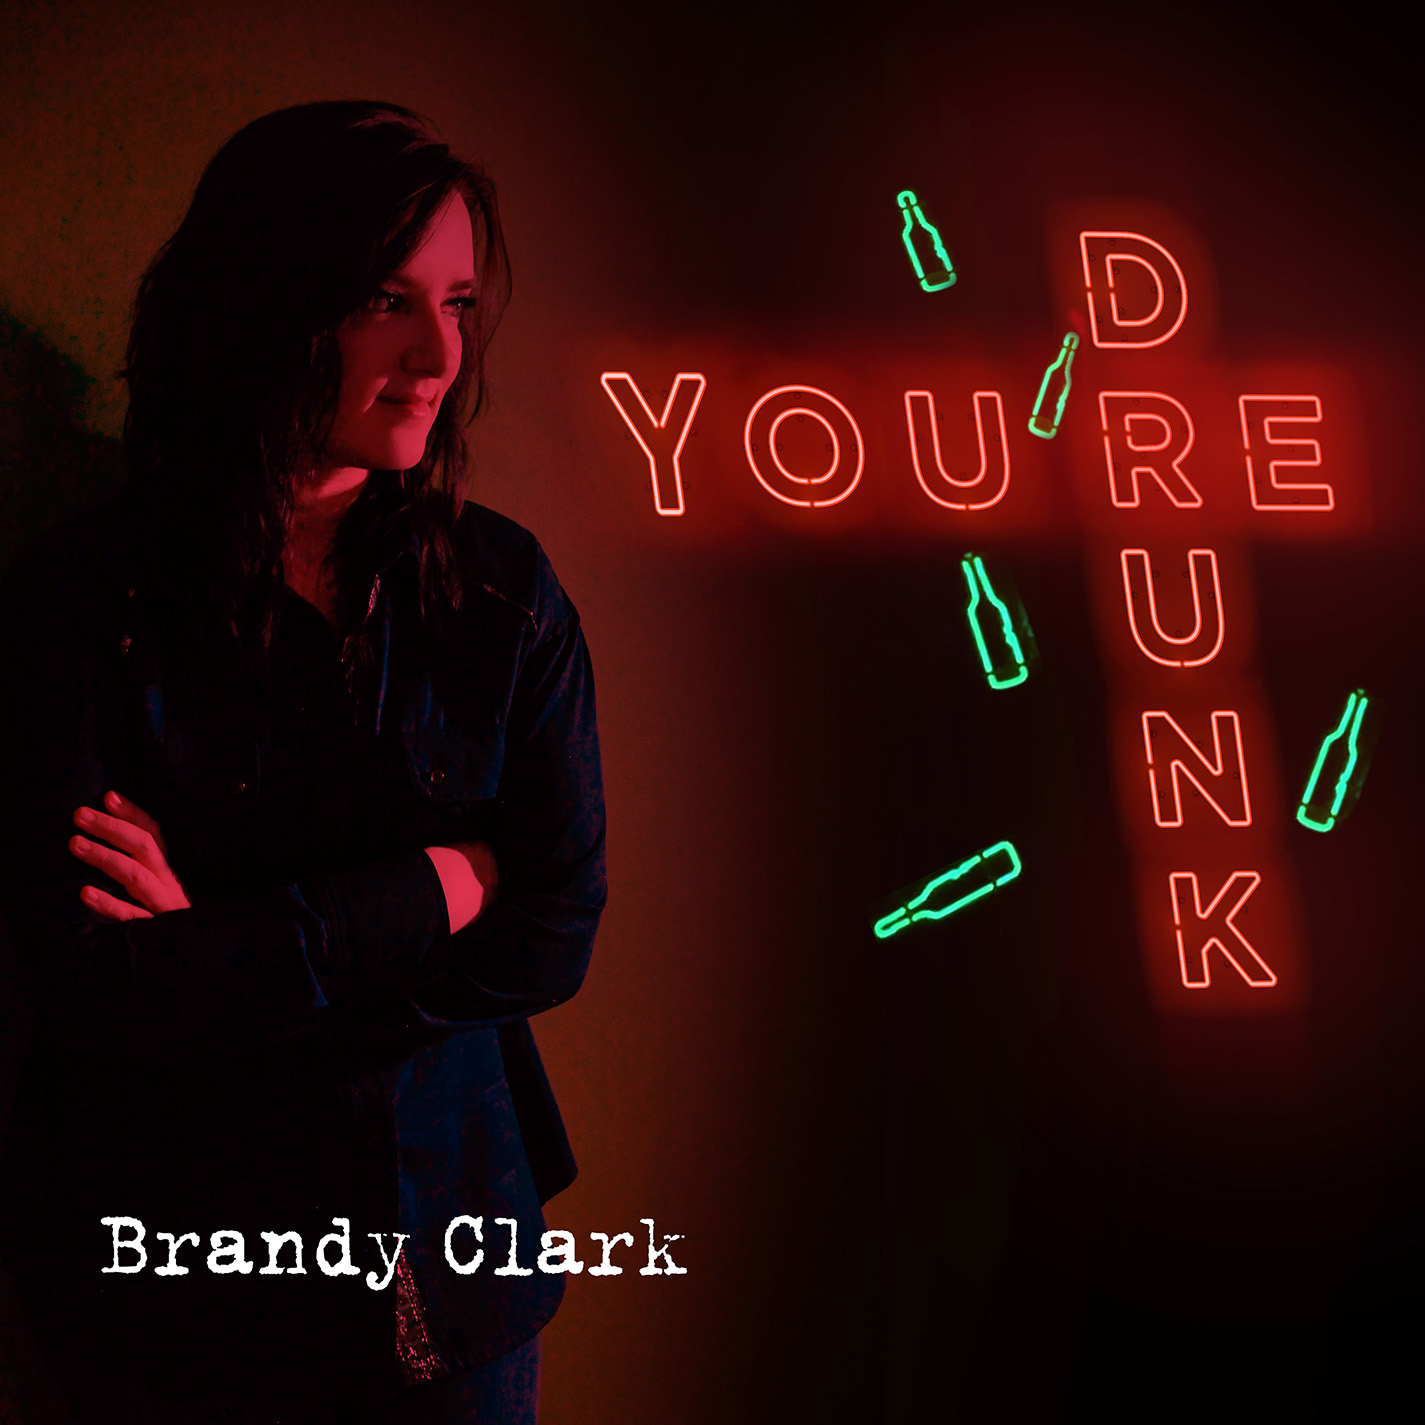 Brandy Clark Releases Outtake from Big Day In a Small Town, “You’re Drunk”